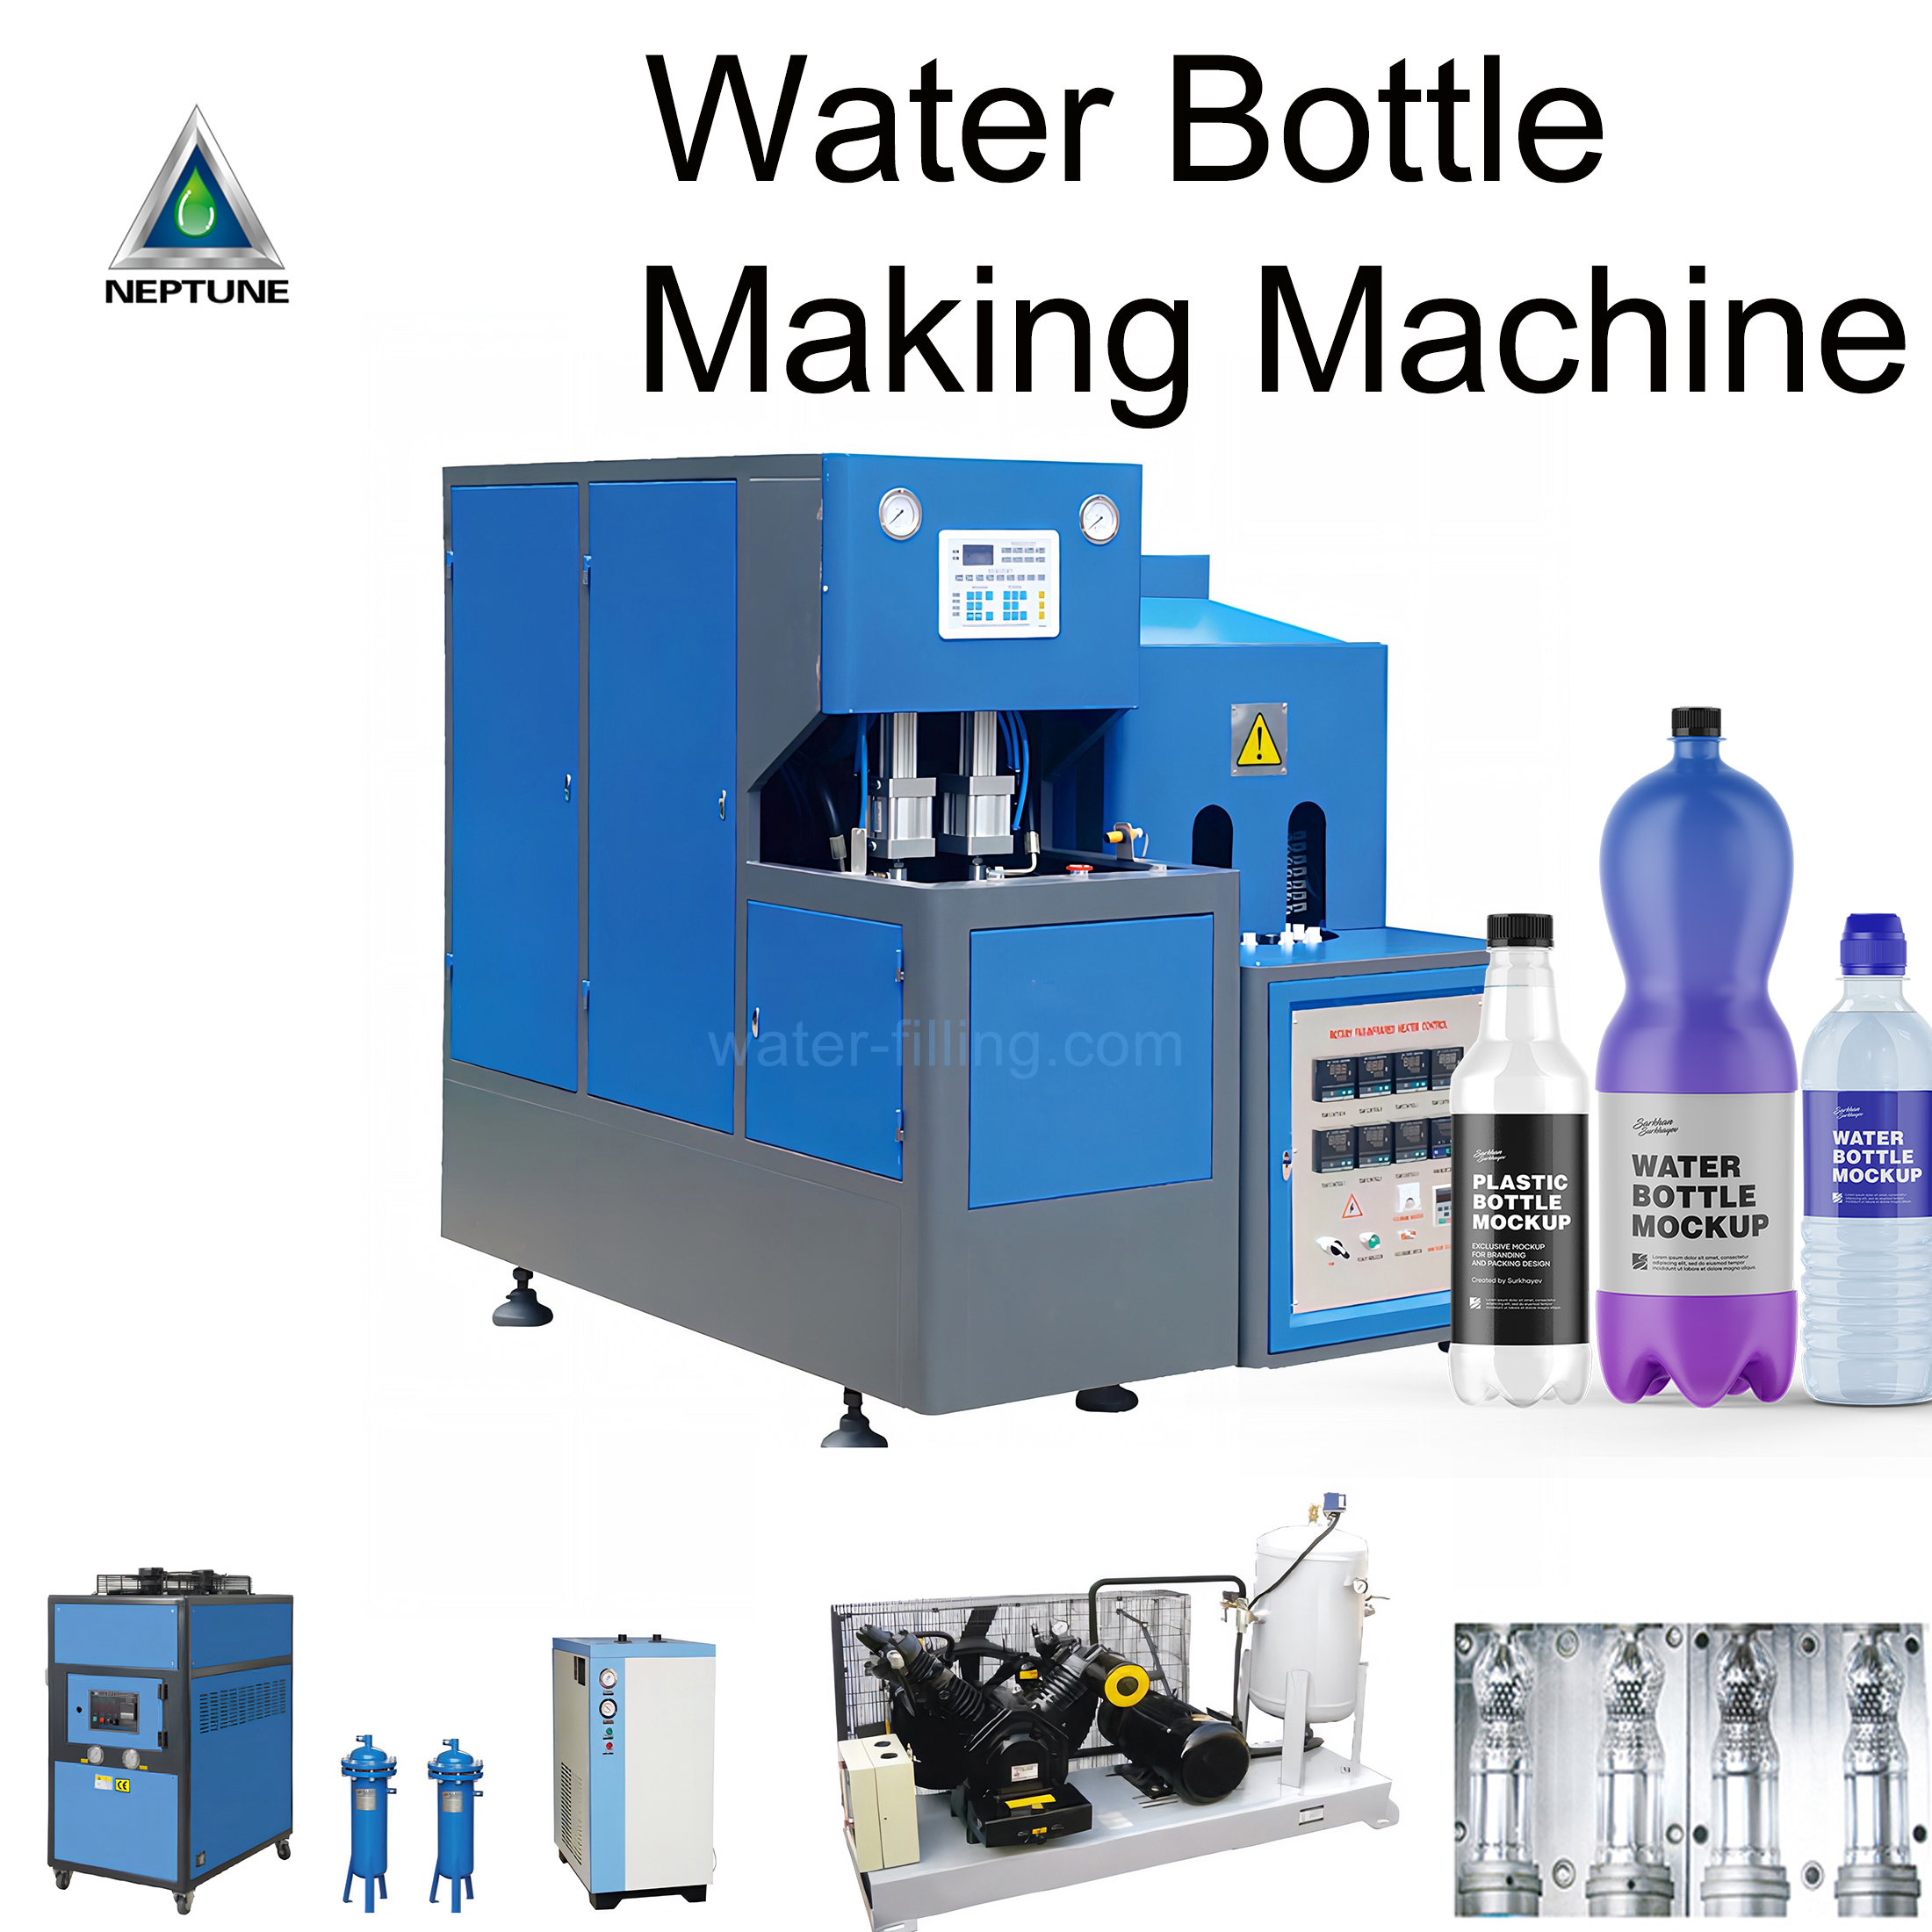 water bottle making machine complete set included blower, heater, mold, air dryer, air filter and air compressor. It is for making 200ml to 2 liter plastic water bottle. 